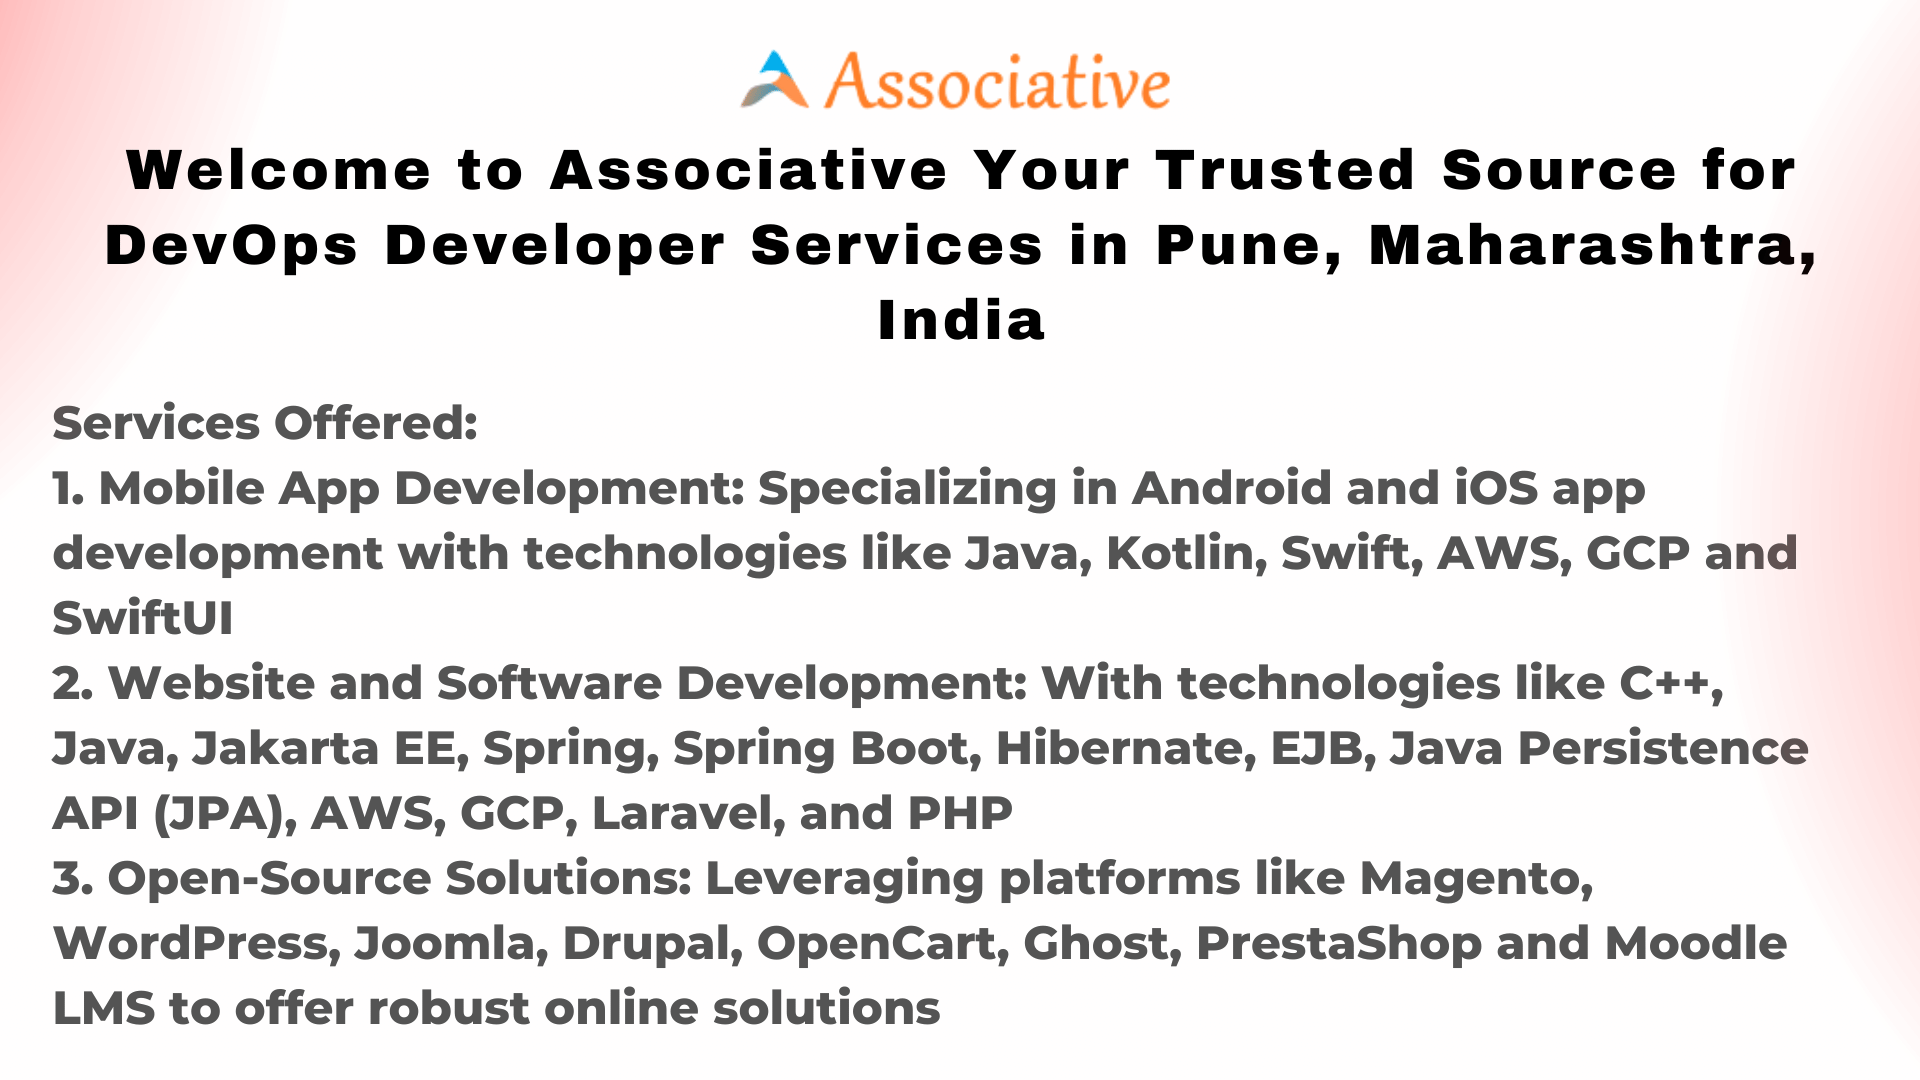 Welcome to Associative Your Trusted Source for DevOps Developer Services in Pune Maharashtra India